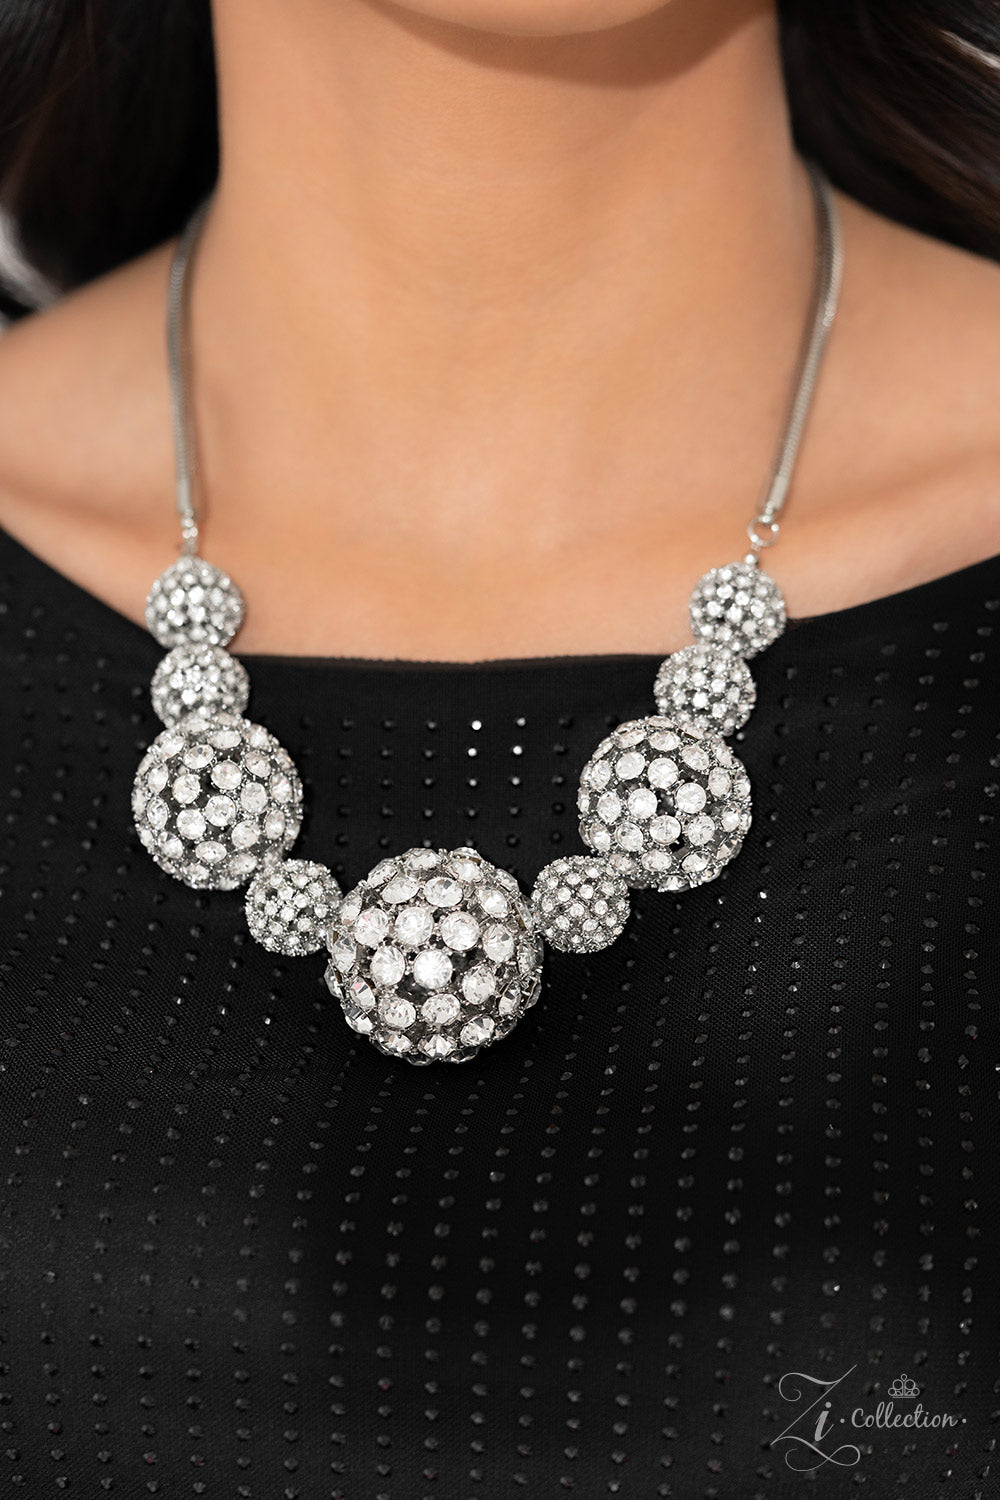 Paparazzi Accessories Undaunted - White Glittery, white rhinestones cluster together, creating dramatically oversized, airy, spheres that sparkle vivaciously. Smaller rhinestone-encrusted spheres dance between the exaggerated accents, resulting in a dynam